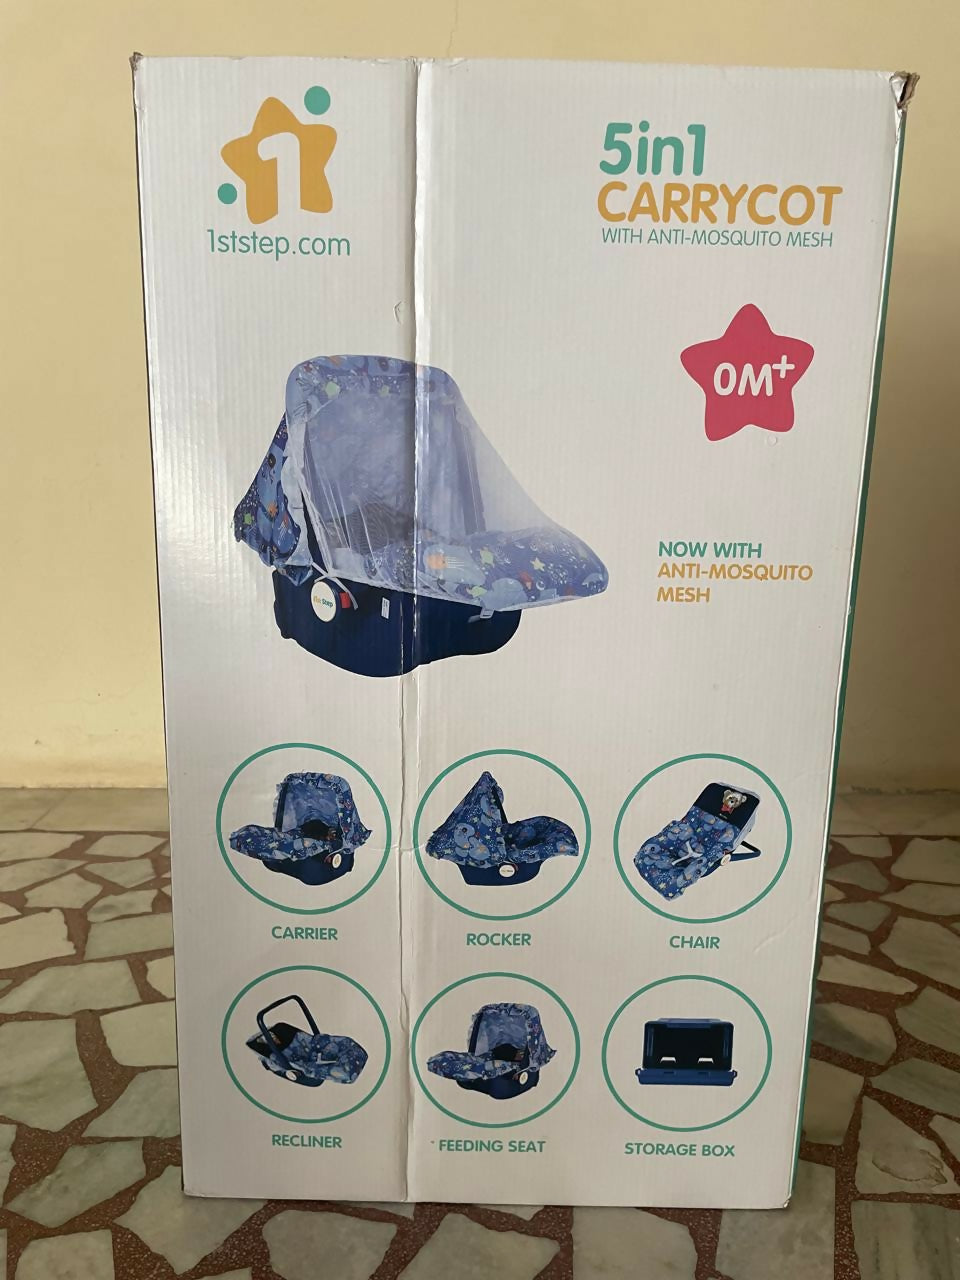 Experience convenience and versatility with the 1st STEP 5-in-1 Carry Cot/Car Seat, offering comfort and safety for your baby from newborn to toddler.